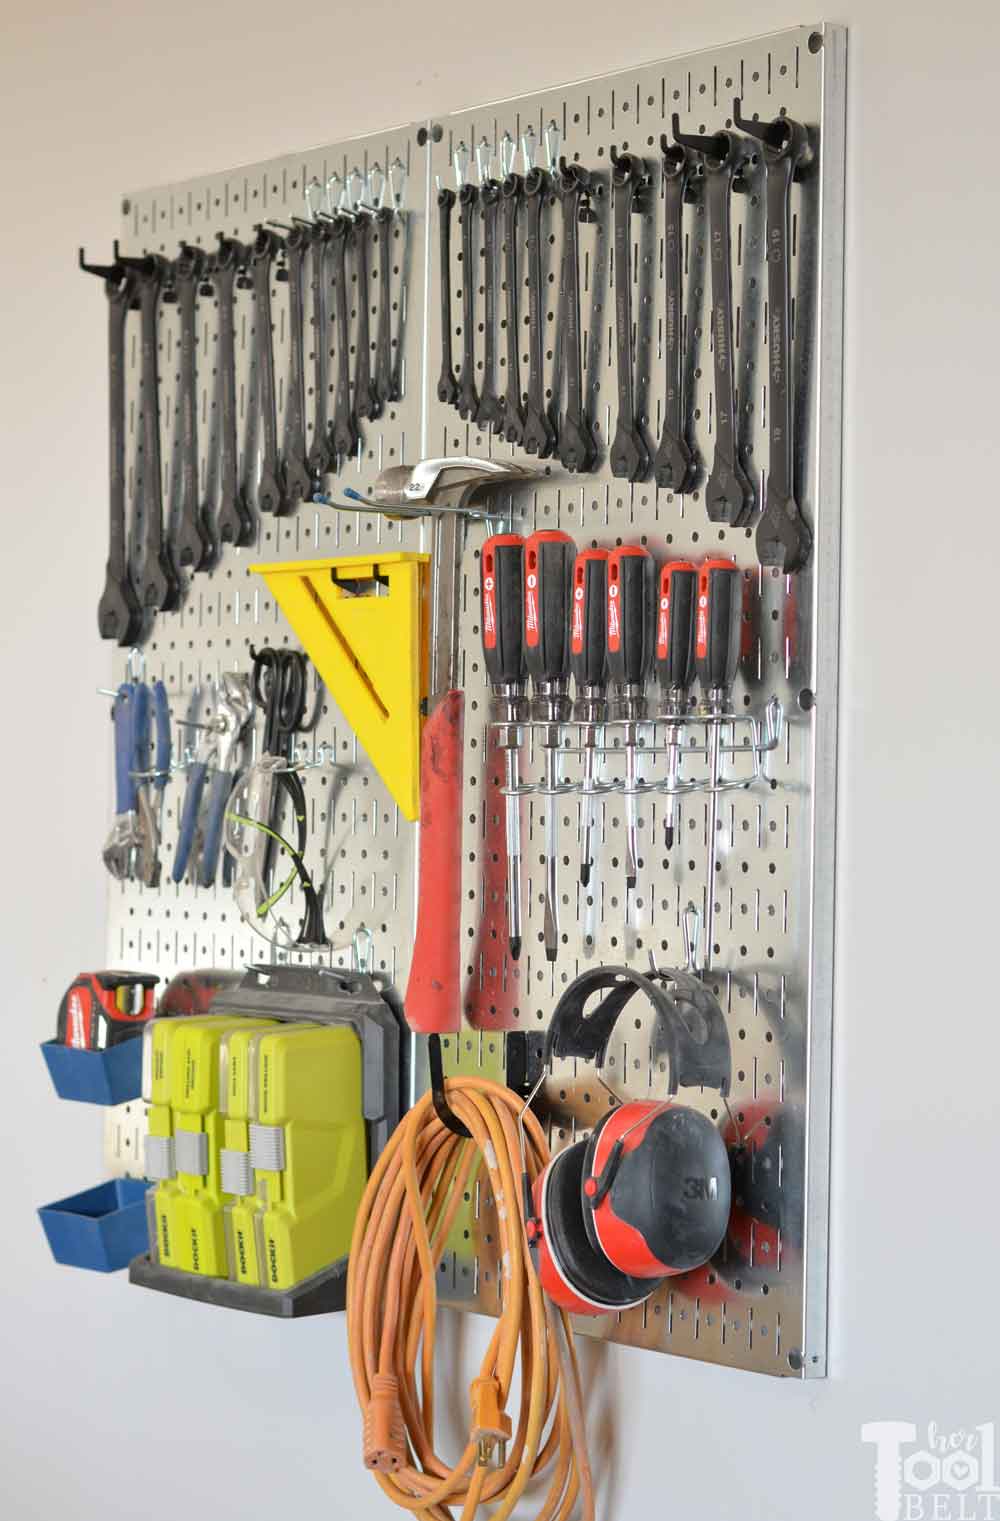 Organize-garage-tools-on-wall-control-husky-wrenchs-screwdrivers - Her ...